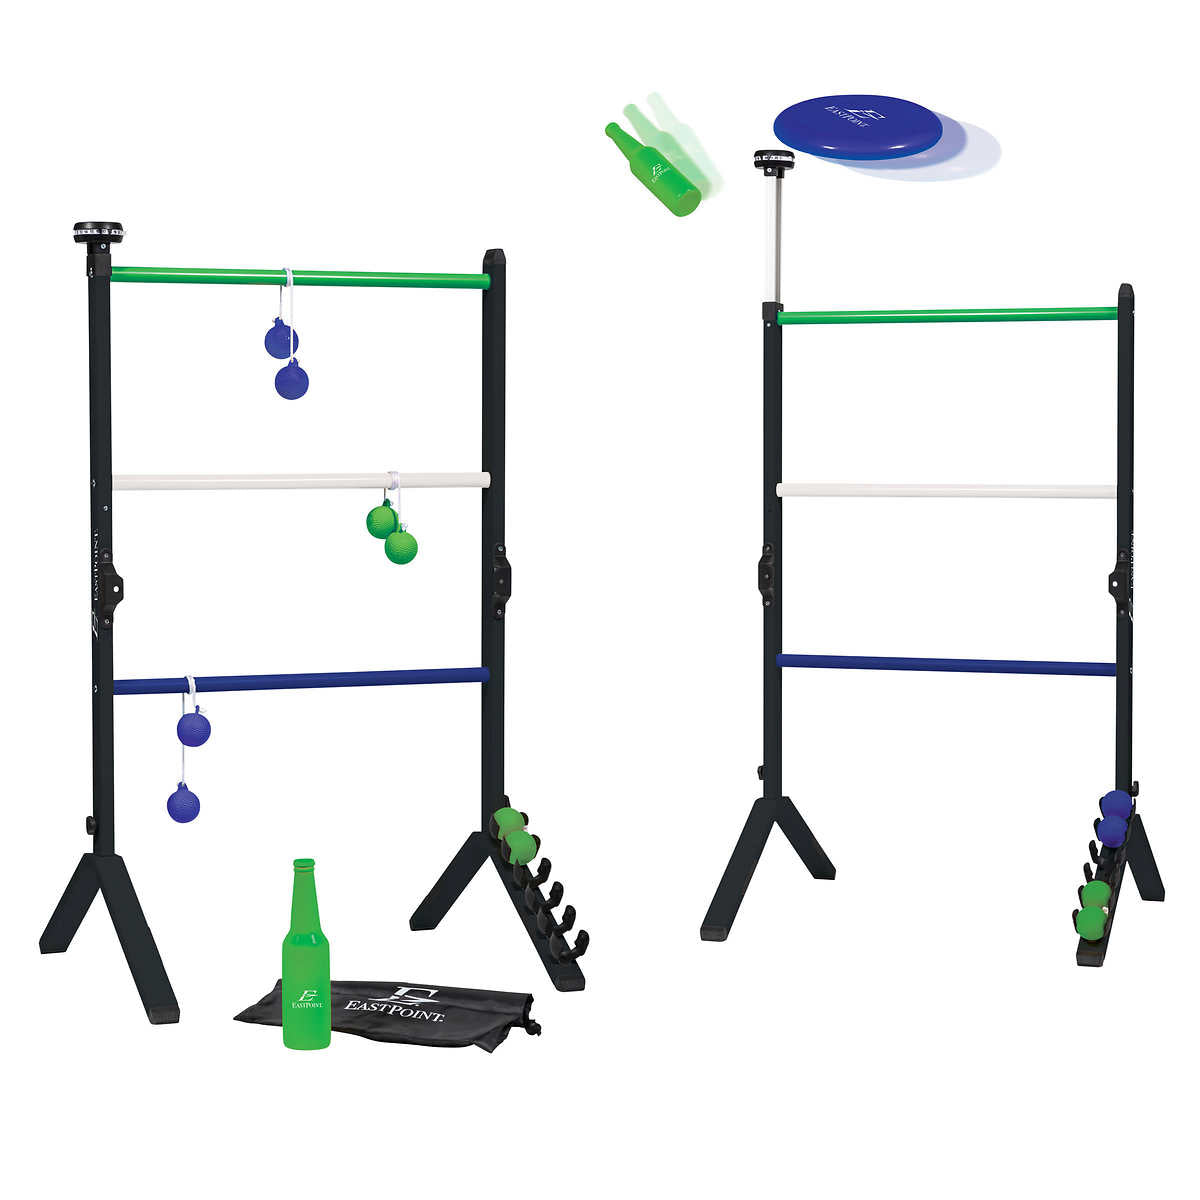 EastPoint Premium 2-in-1 Ladderball and Bottle Smash Combo Set